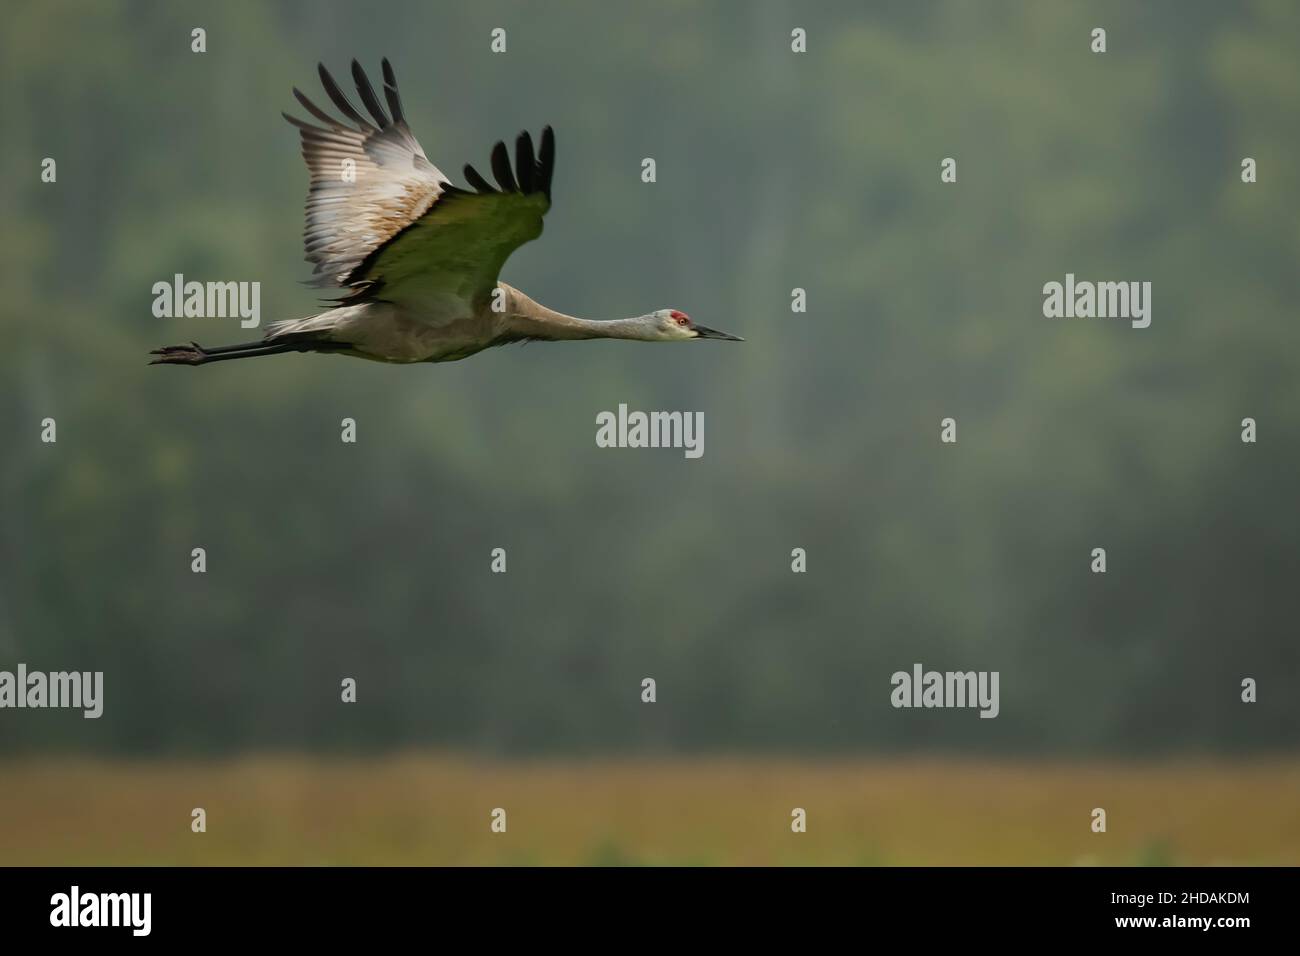 Closeup of a Sandhill Crane flying with its sings open at Creamers Field, Fairbanks, Alaska, USA Stock Photo